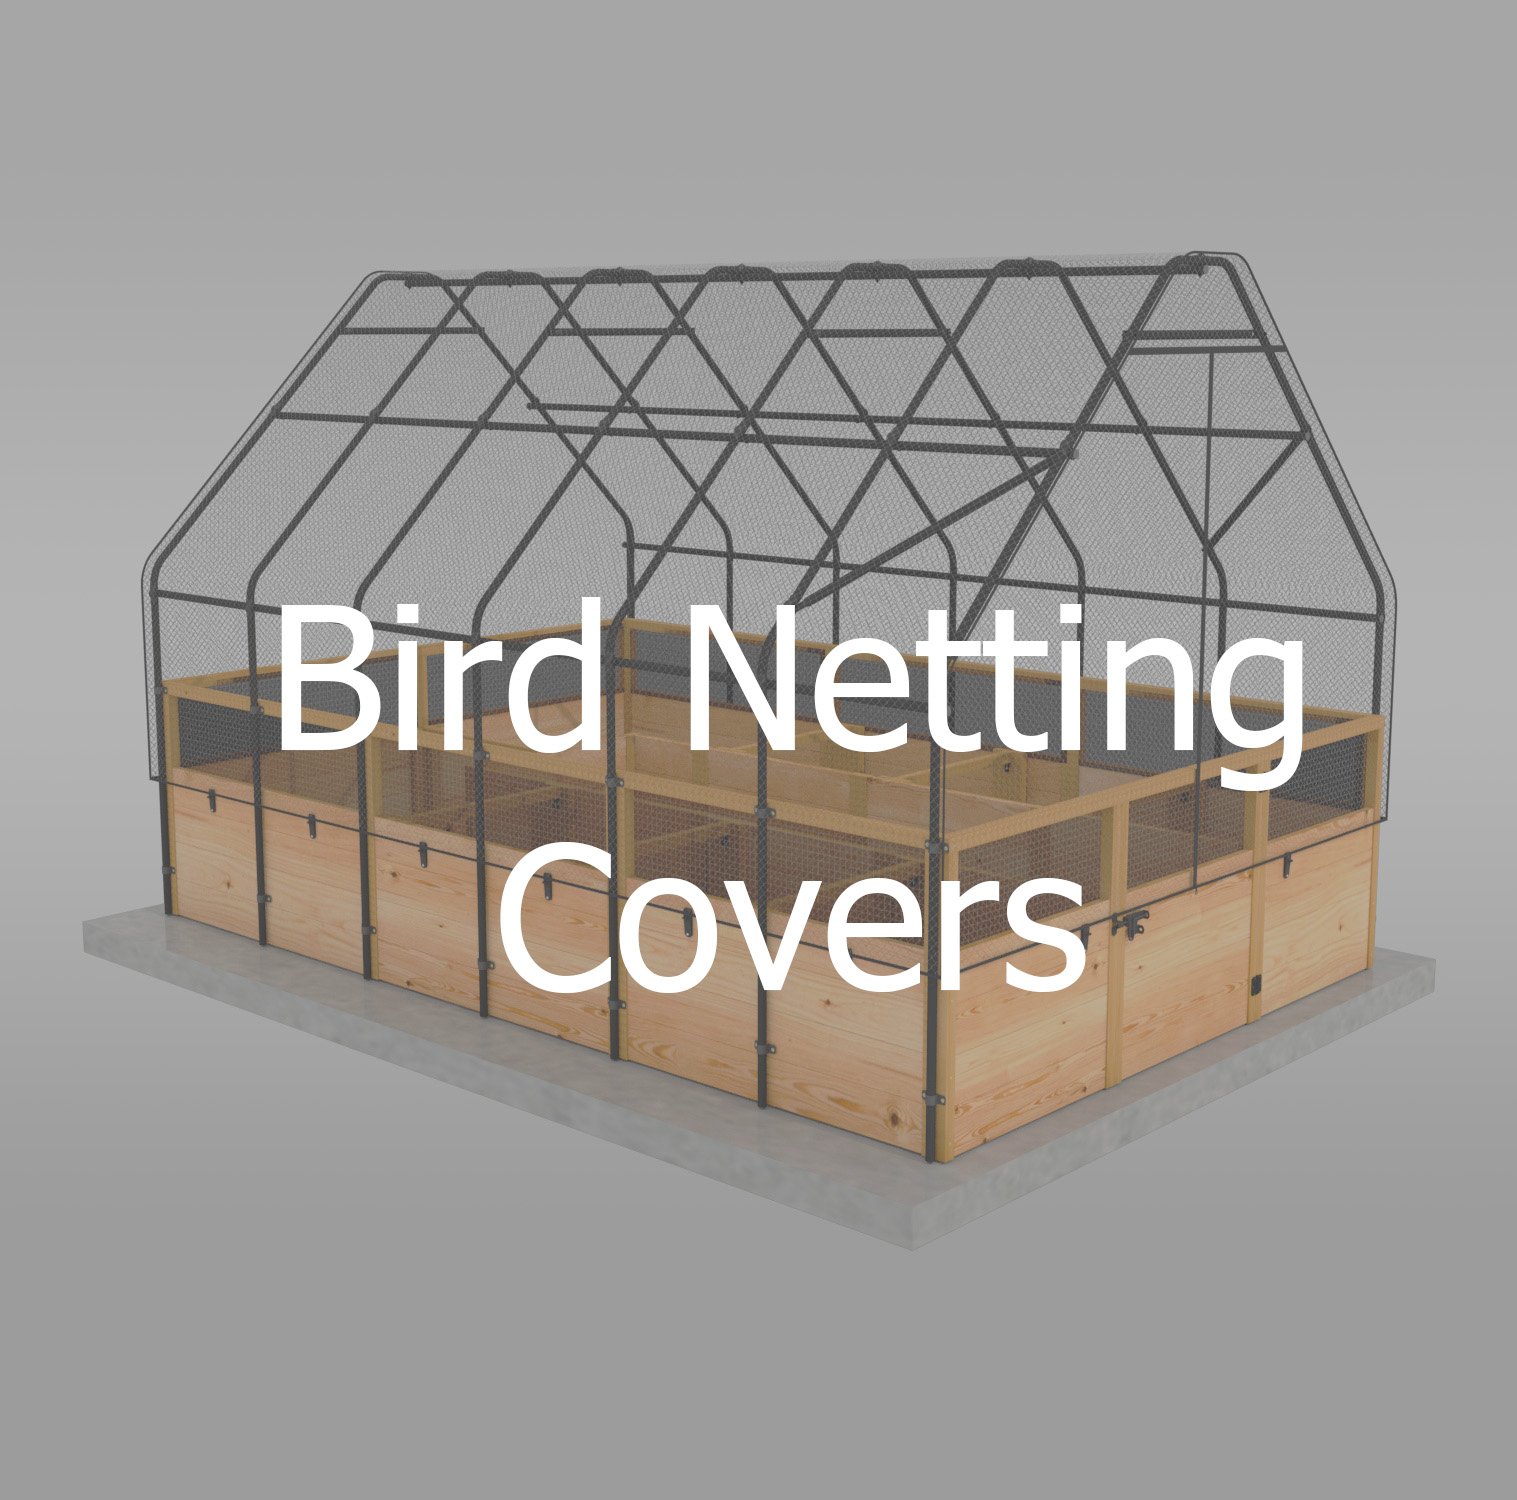 Bird Netting Covers for Garden Products 8×16 Include Metal Frame by Outdoor Living Today